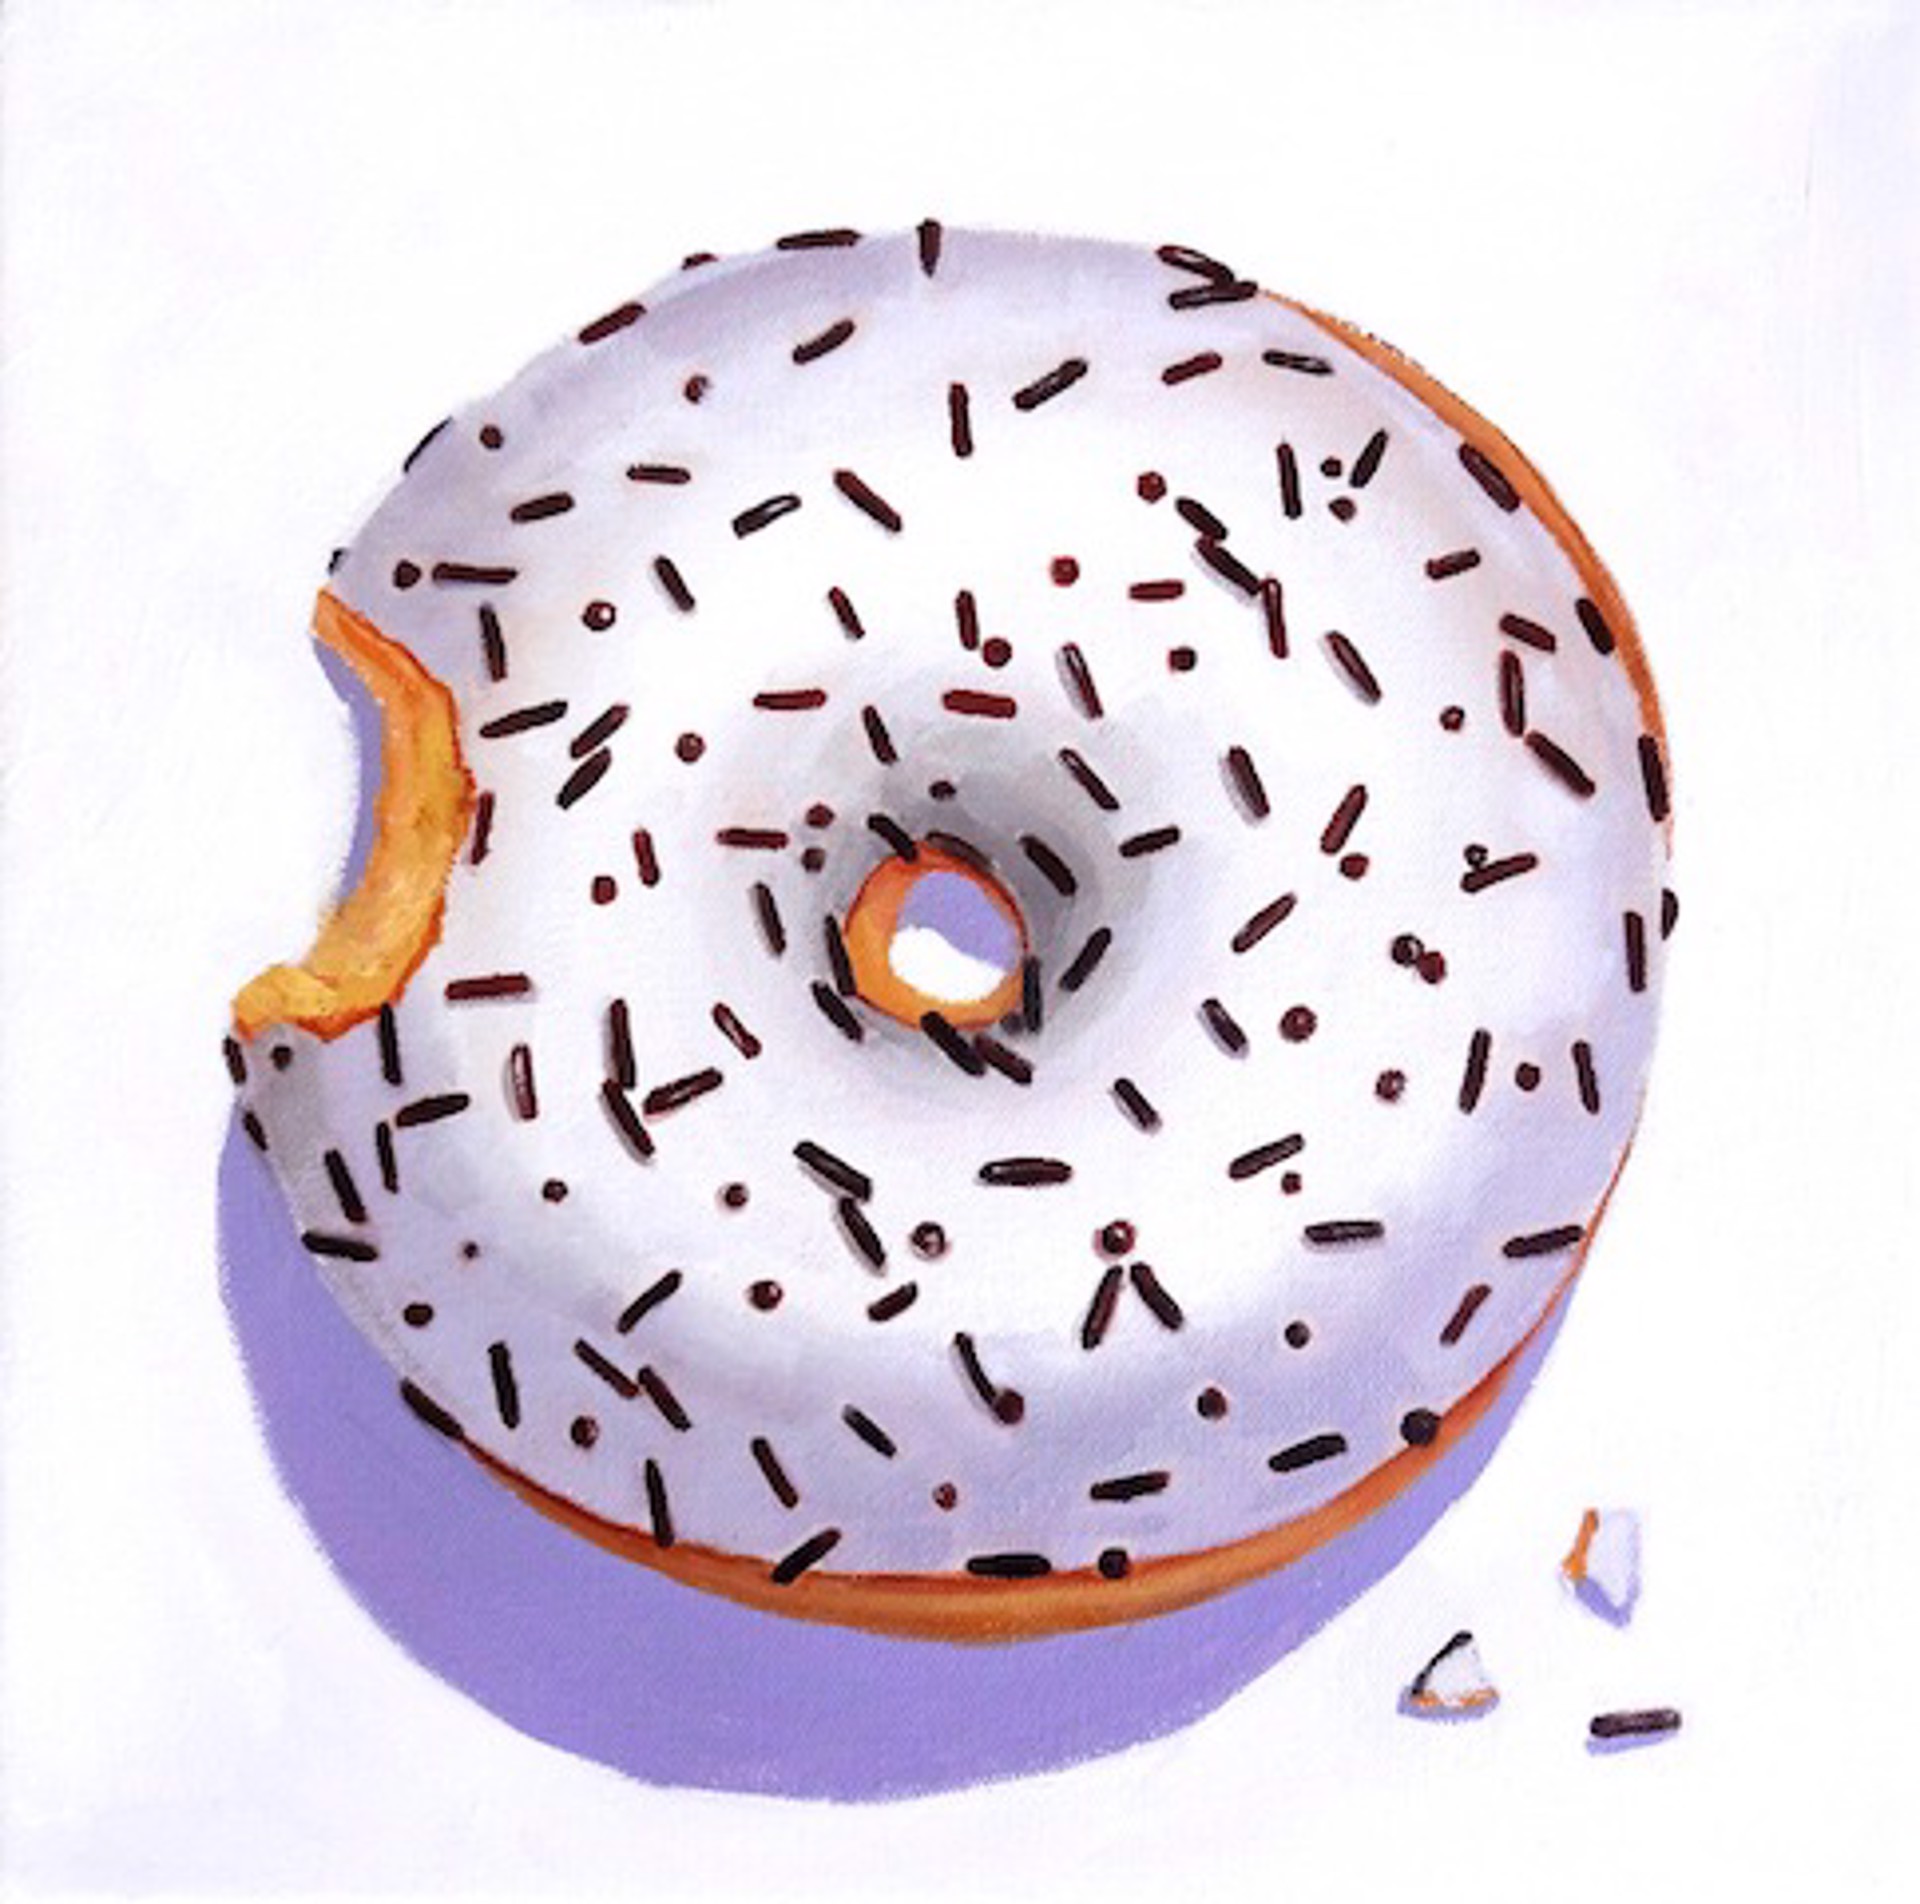 White With Chocolate Sprinkles by Terry Romero Paul